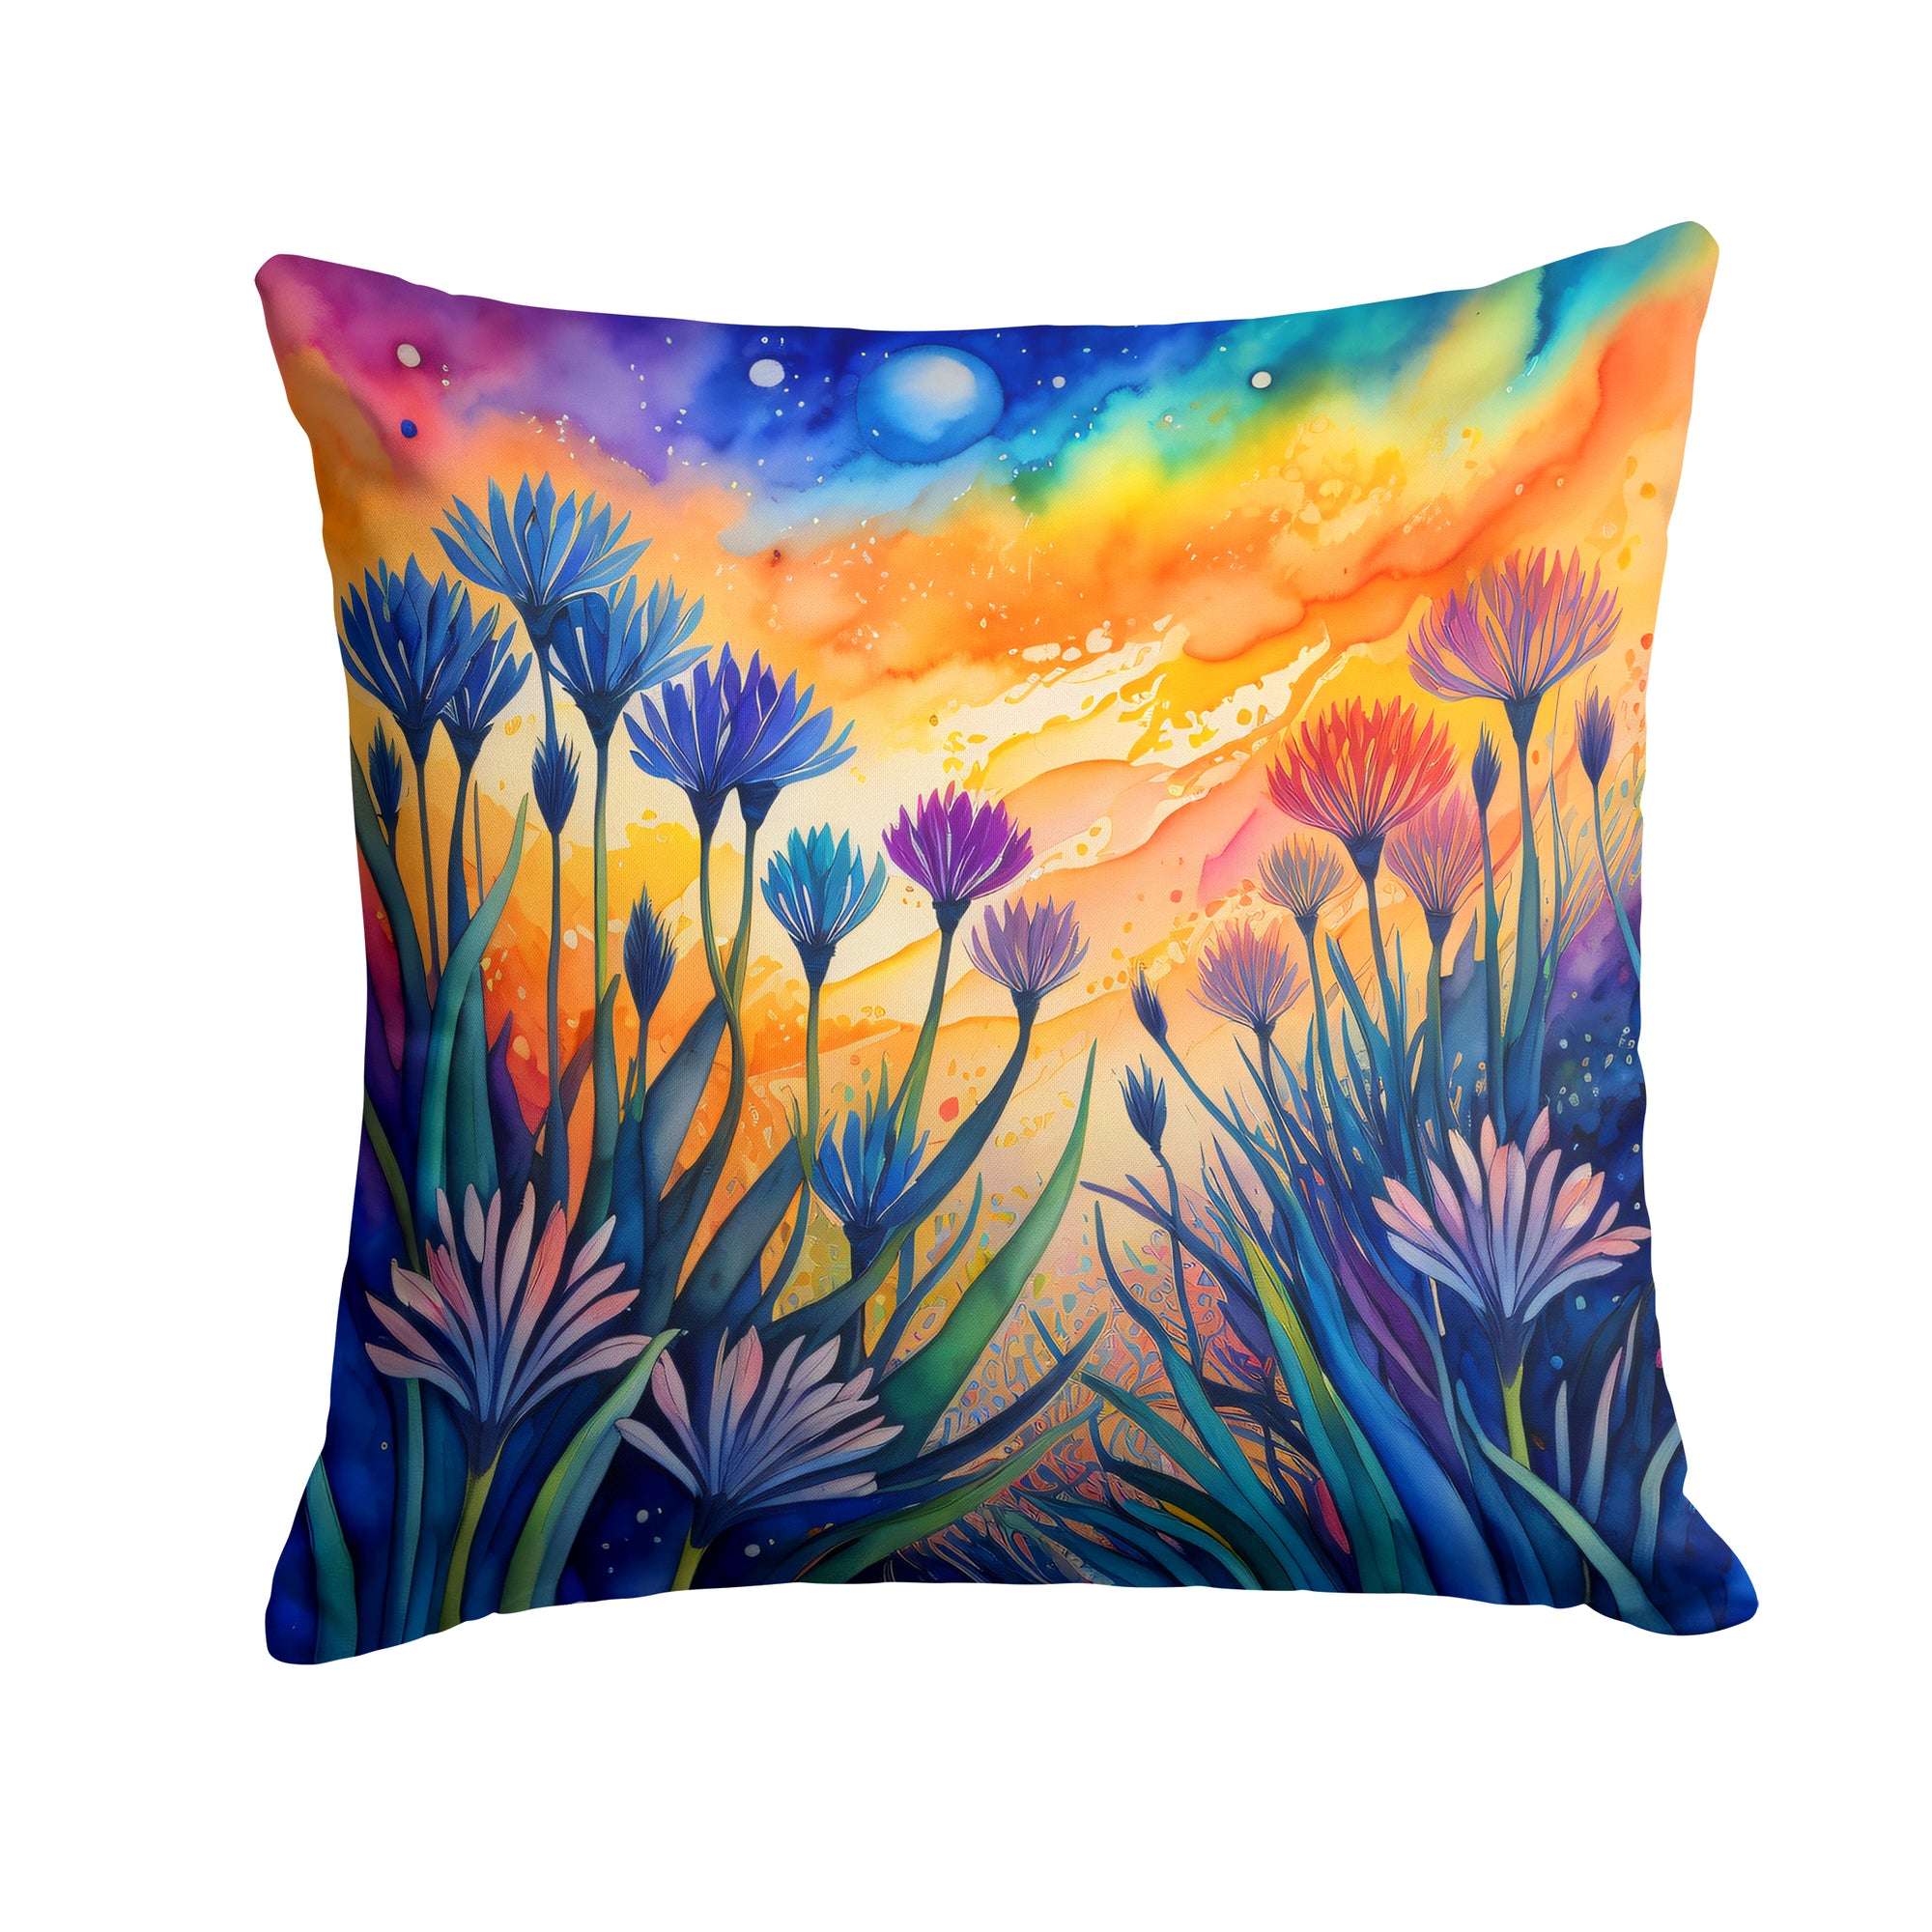 Buy this Colorful Agapanthus Fabric Decorative Pillow